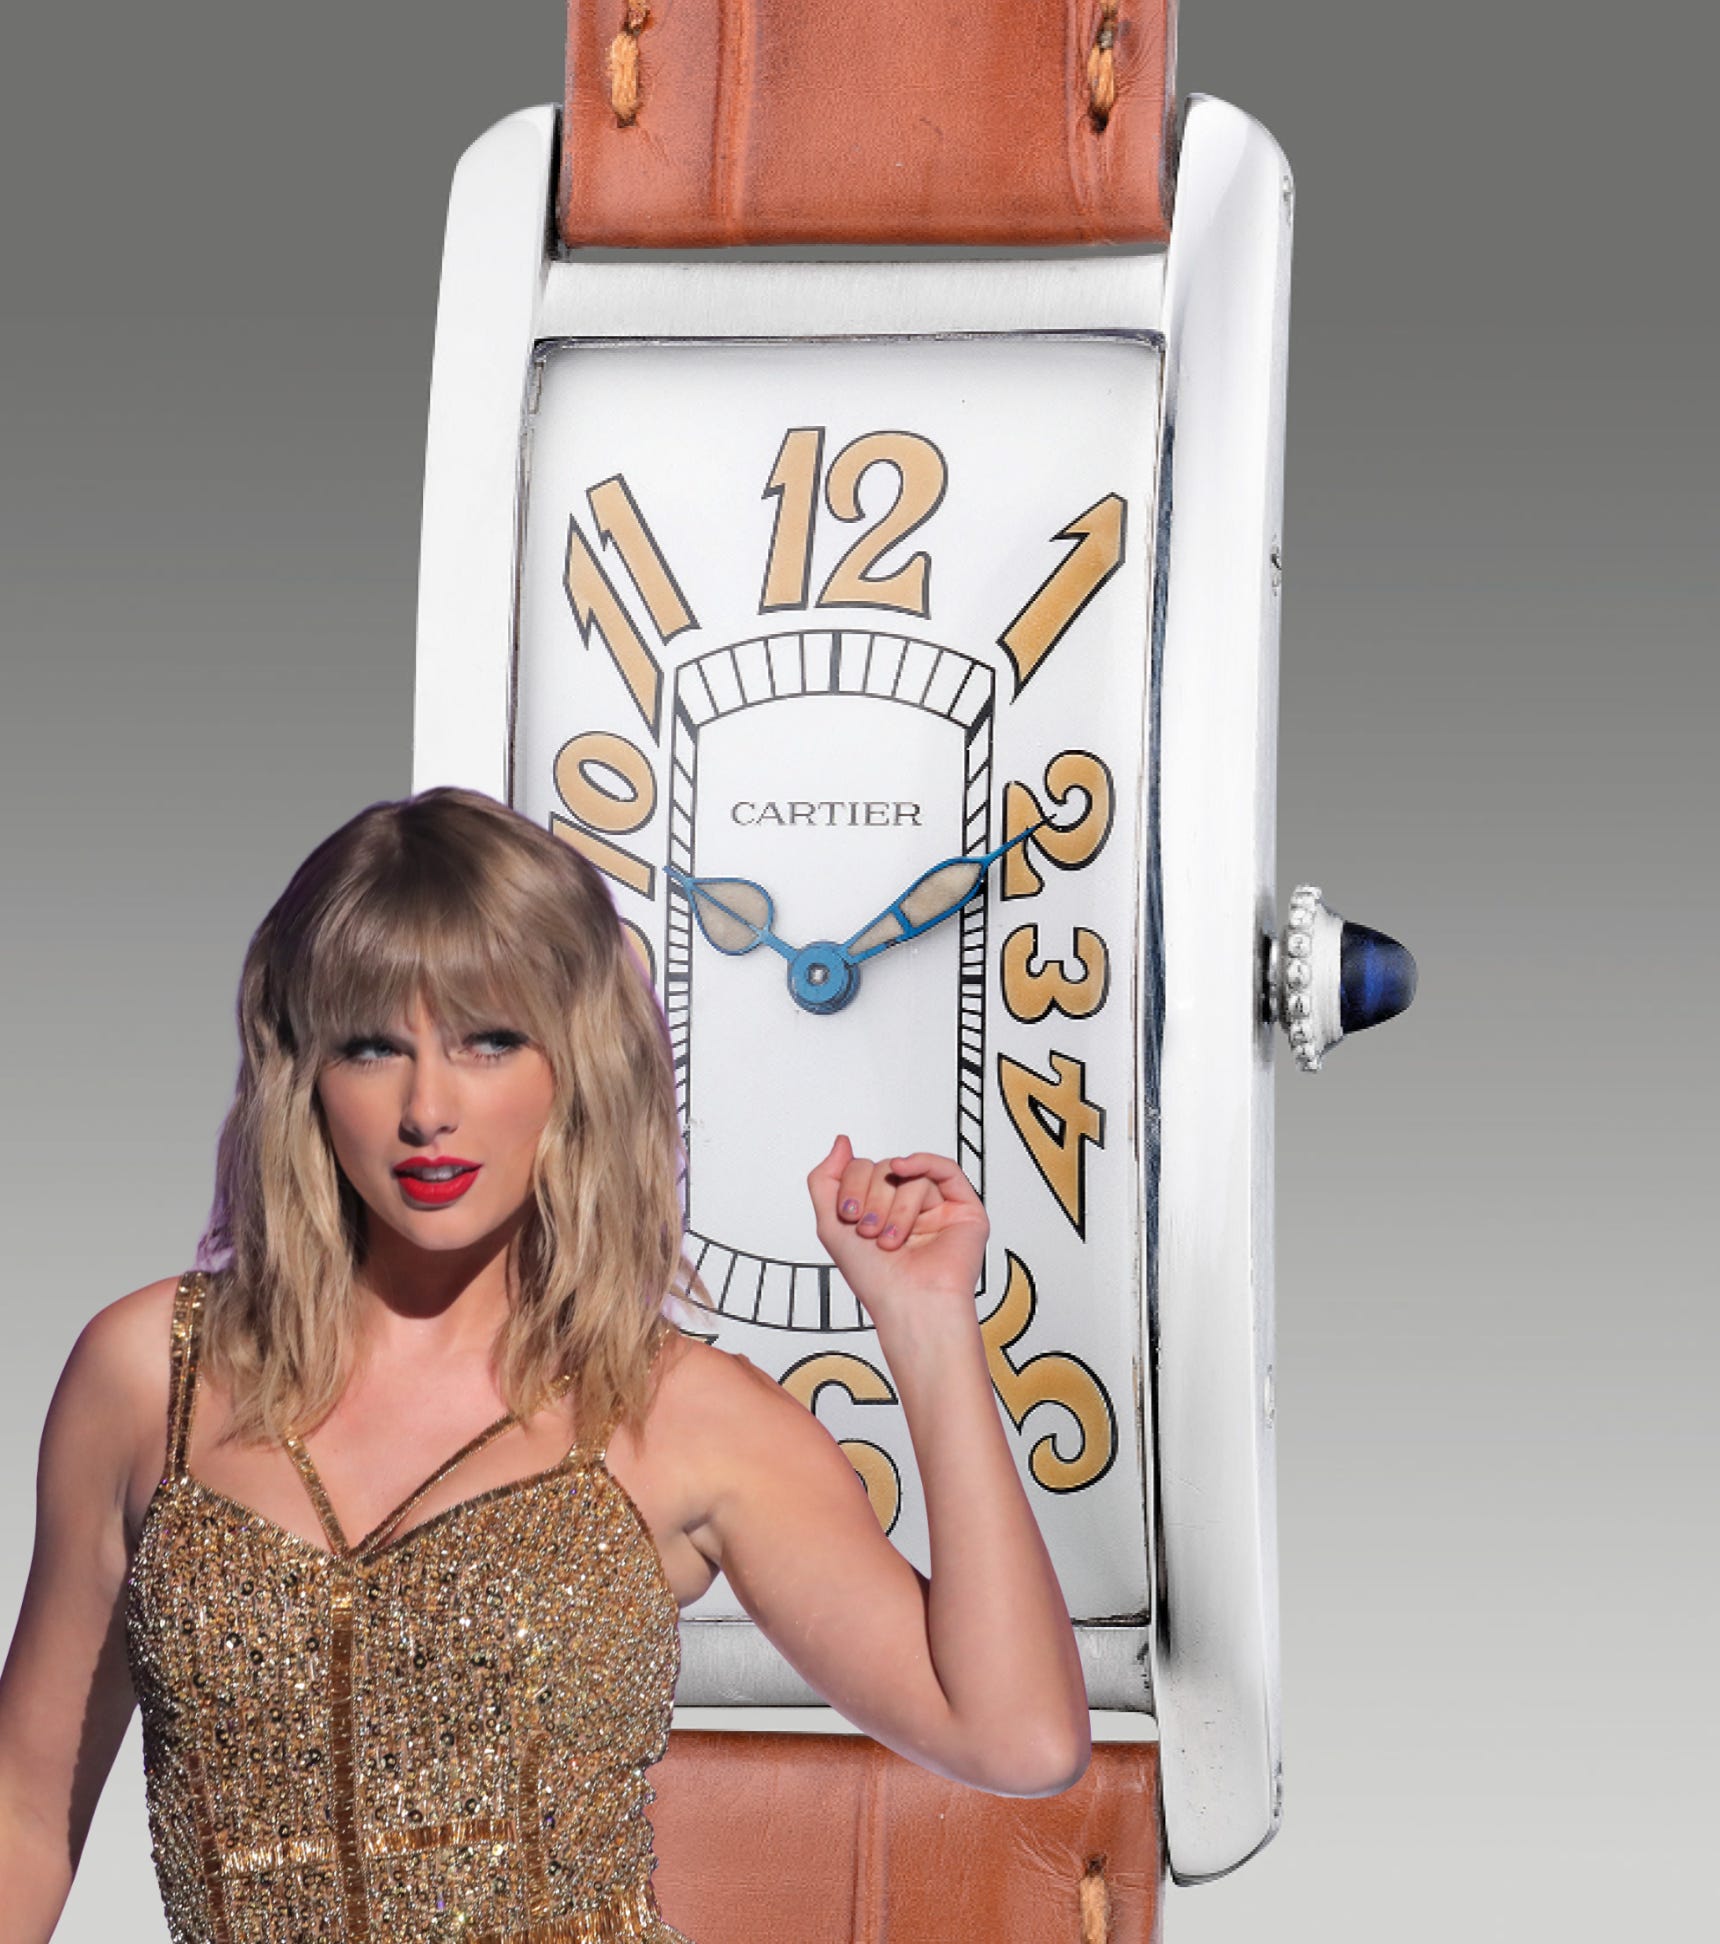 What Taylor Swift can teach us about restoring vintage watches